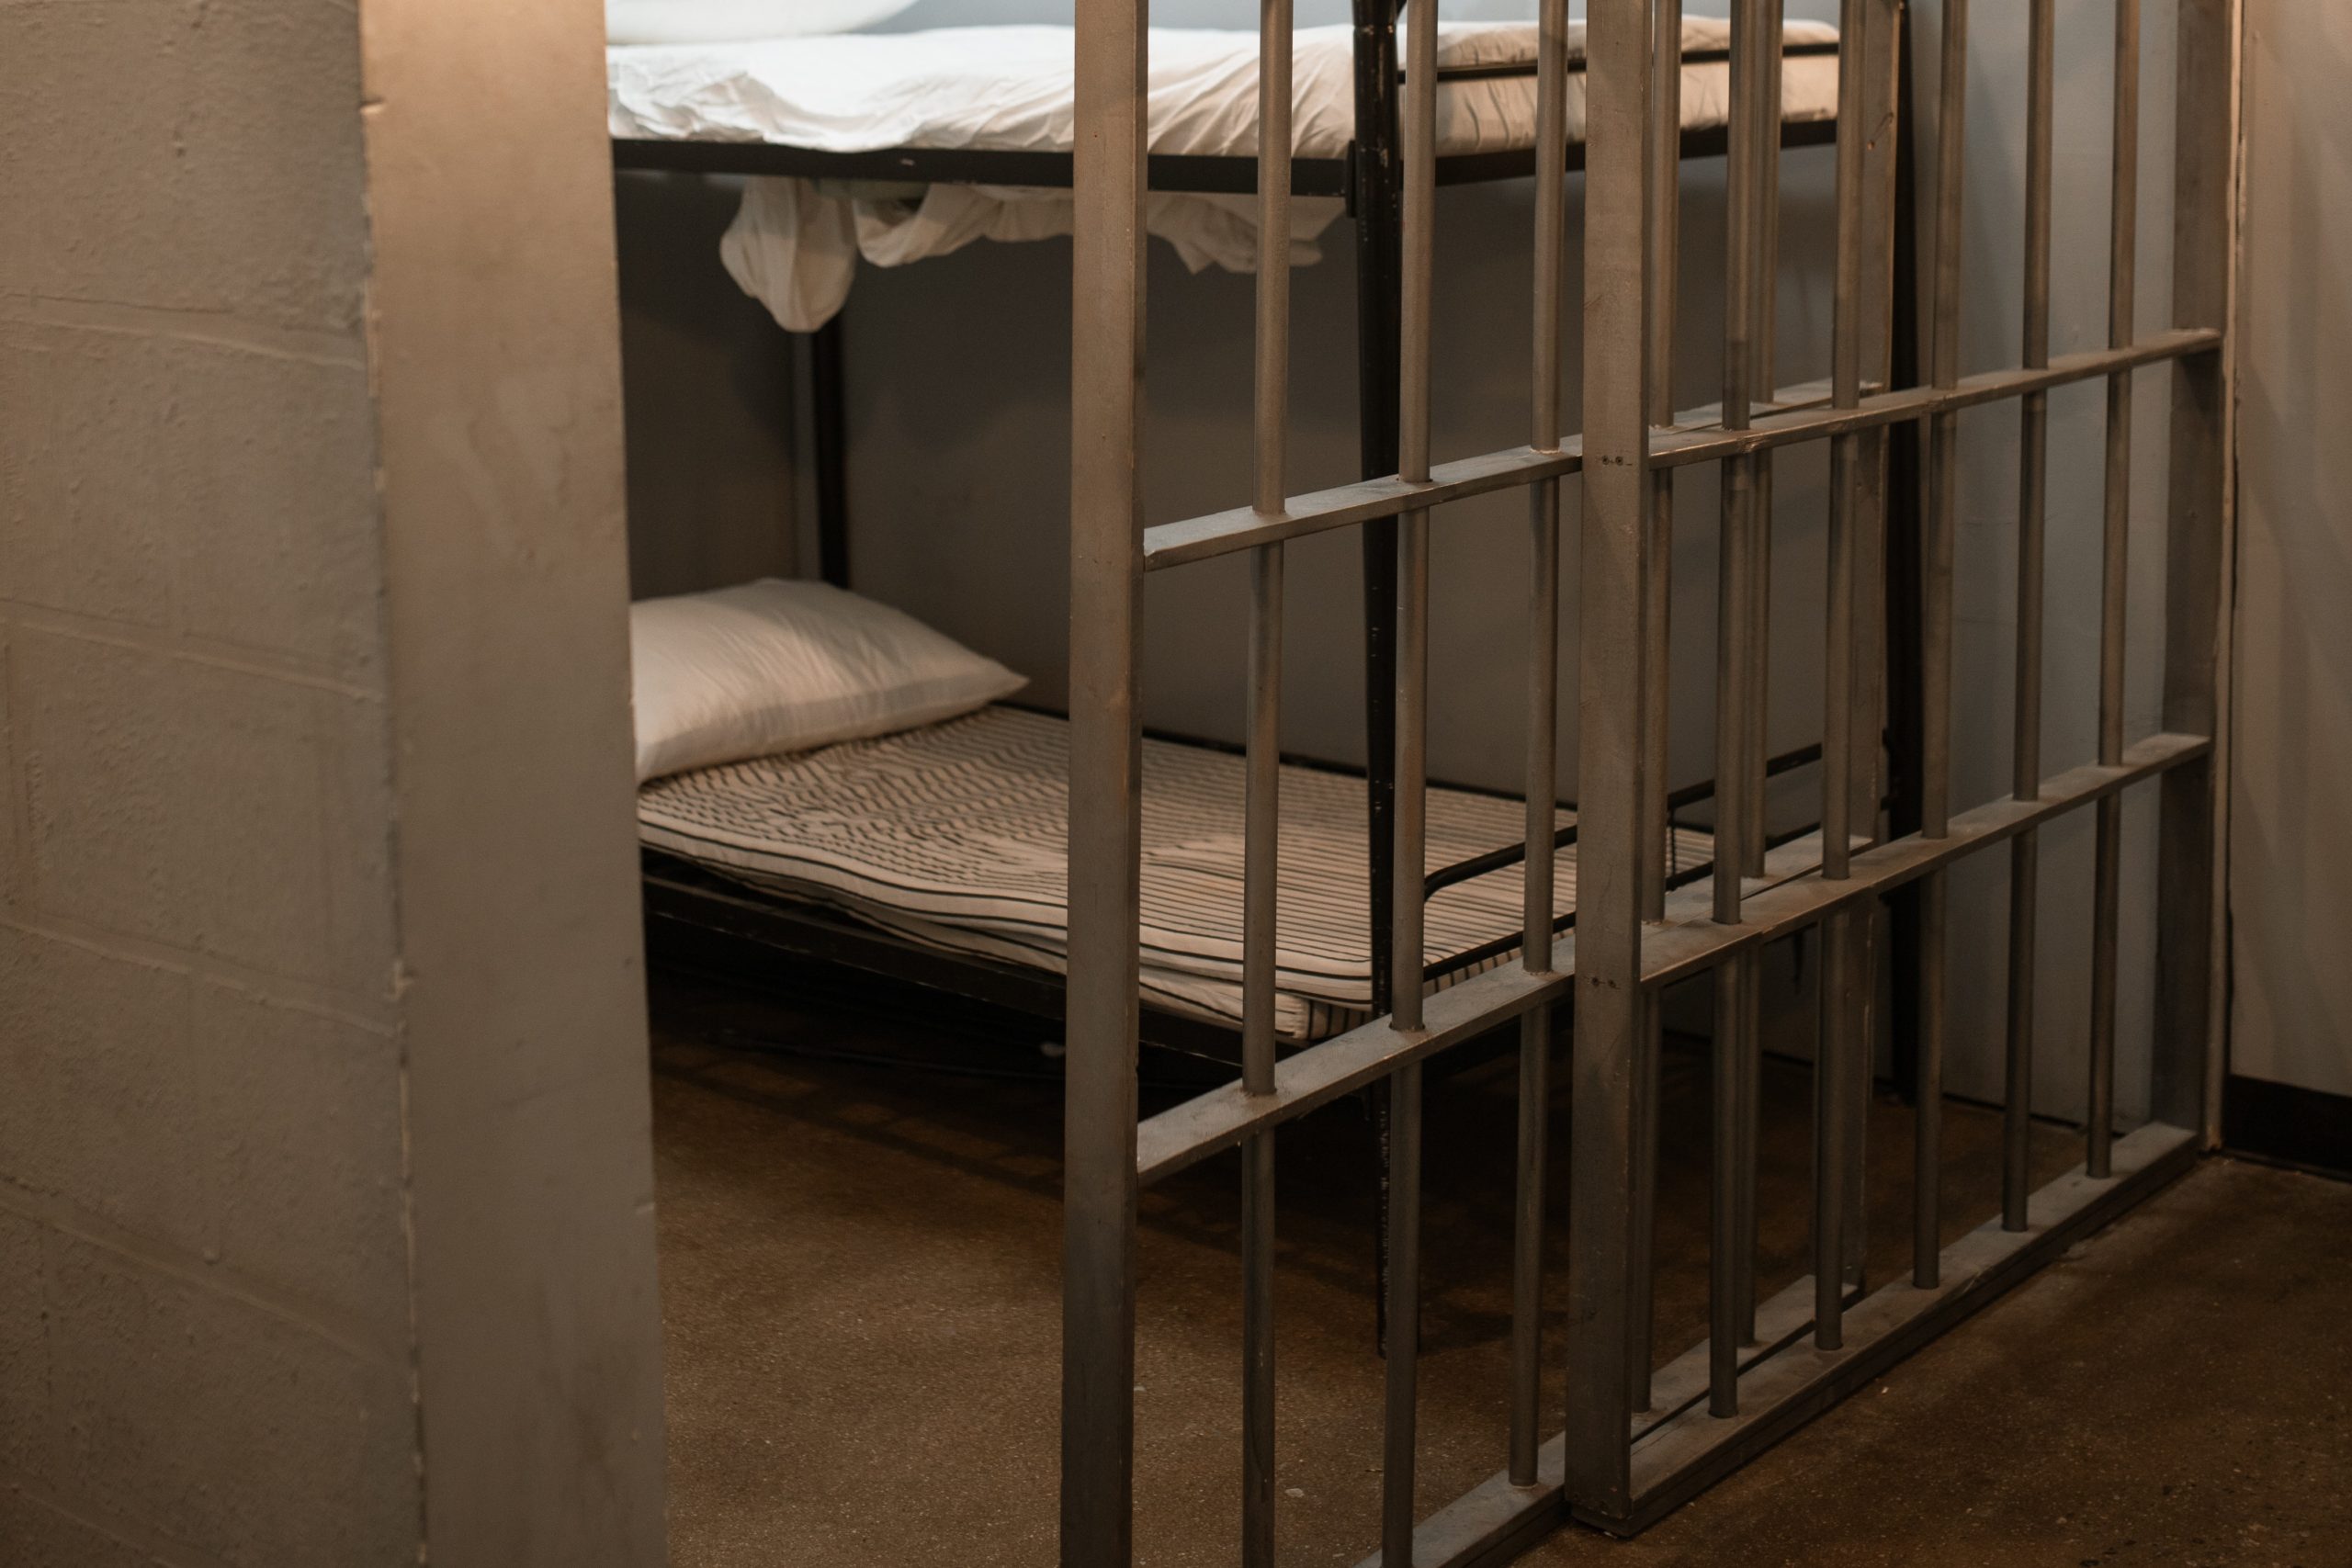 Prisons in Florida and across U.S. host deplorable conditions